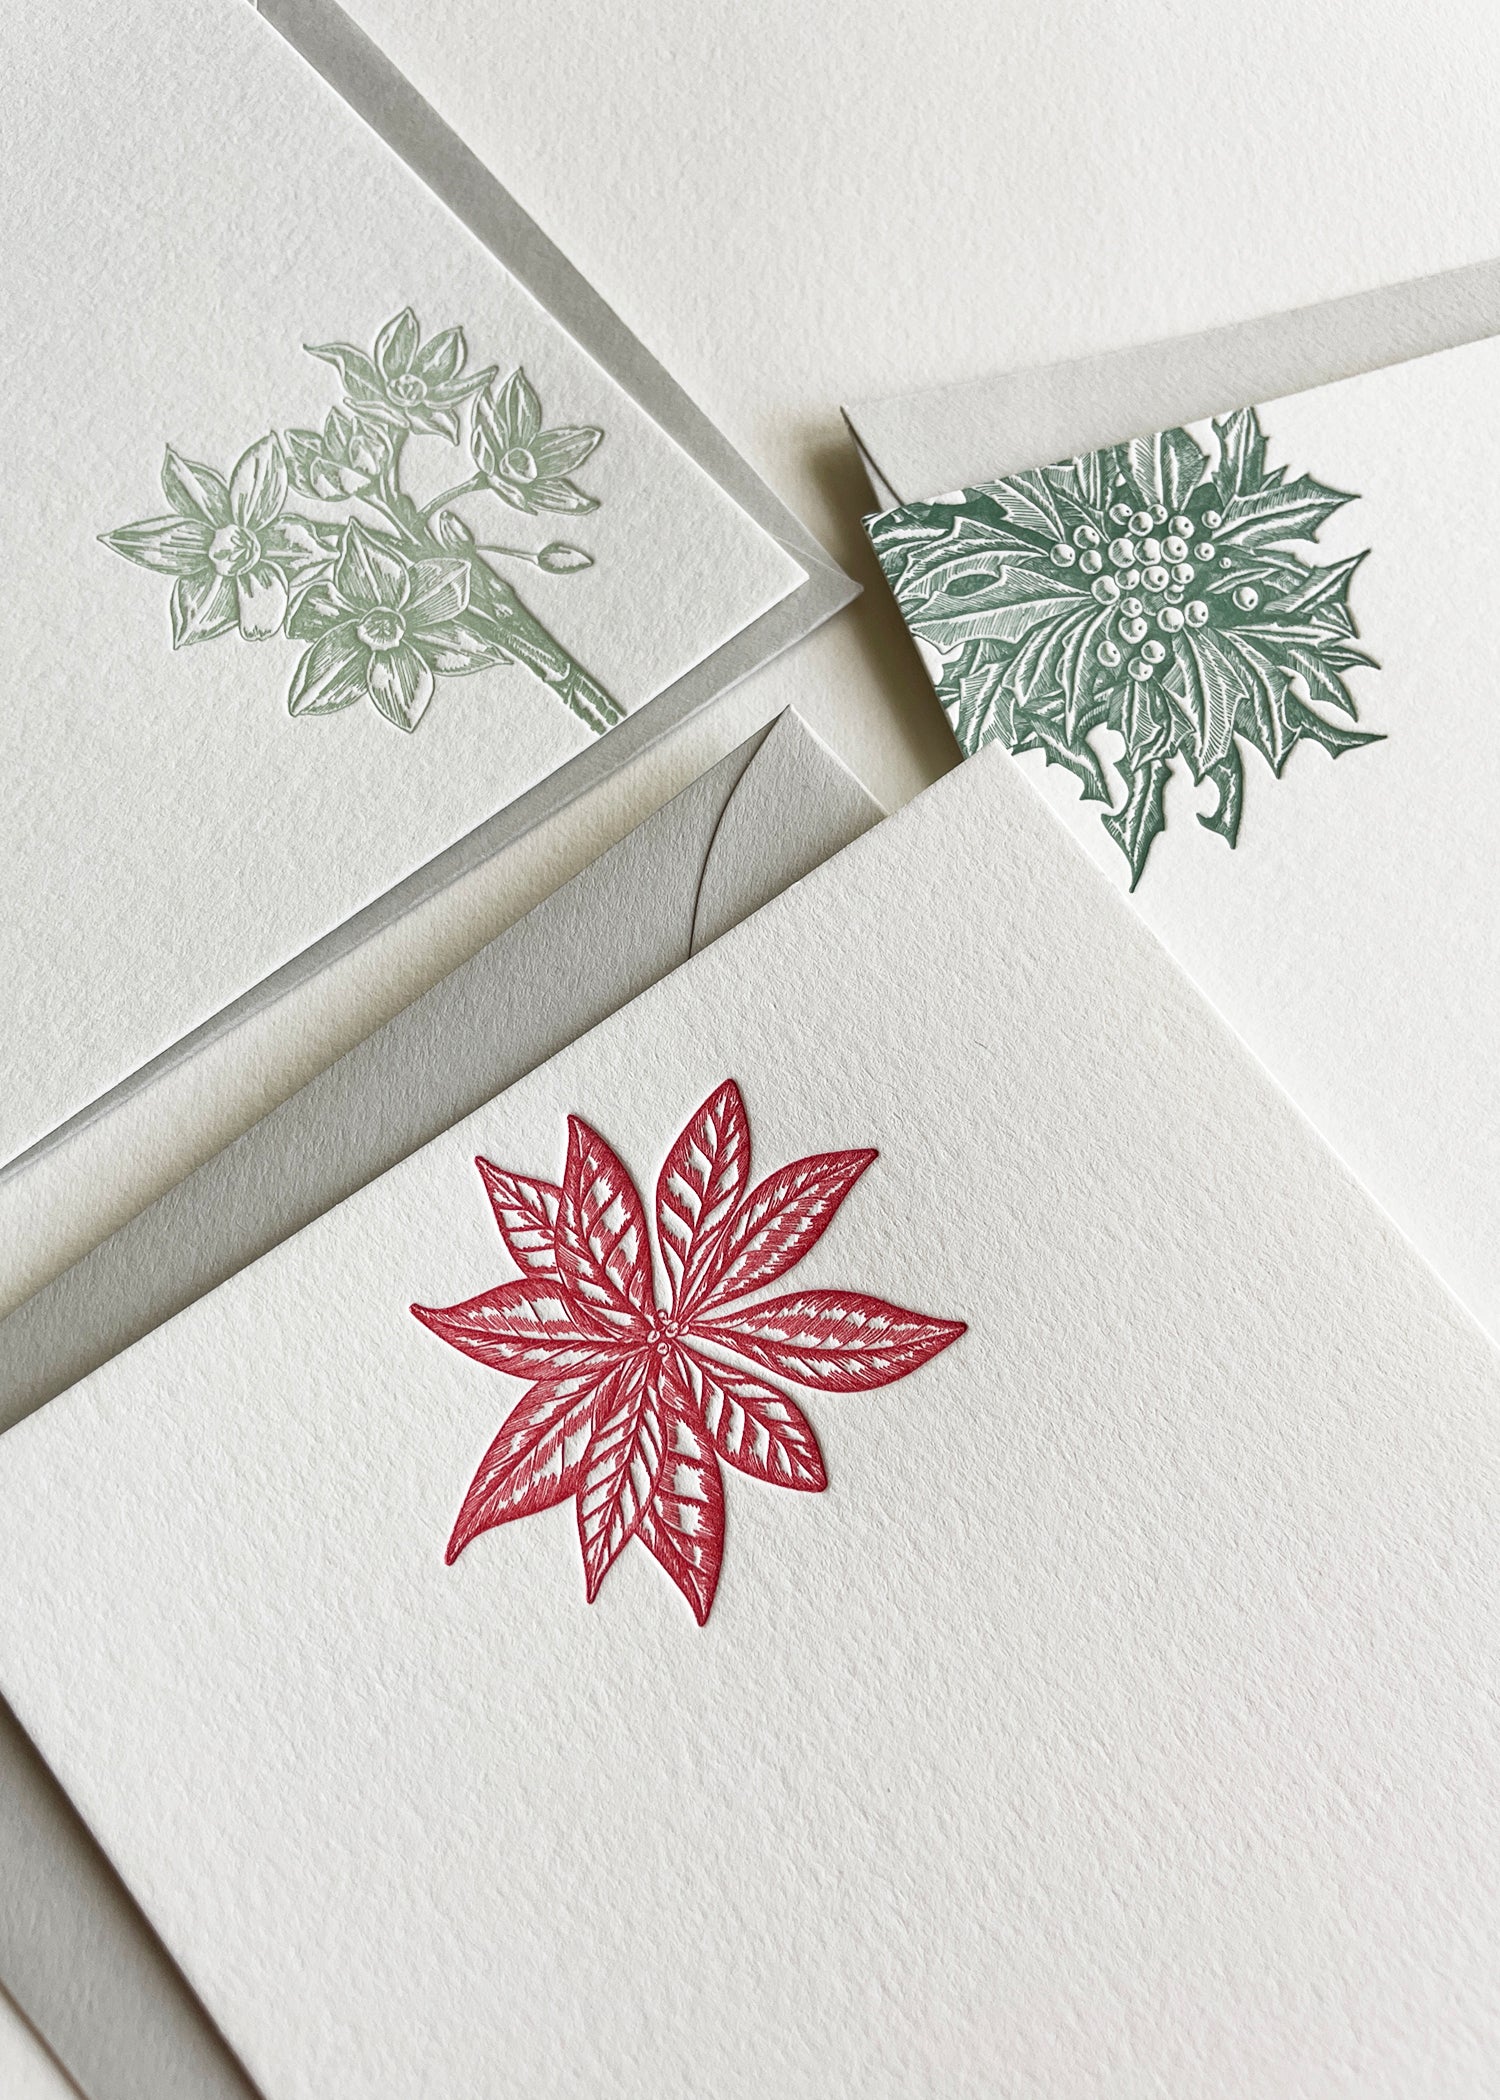 A variety of letterpress holiday flat note cards by Rust Belt Love